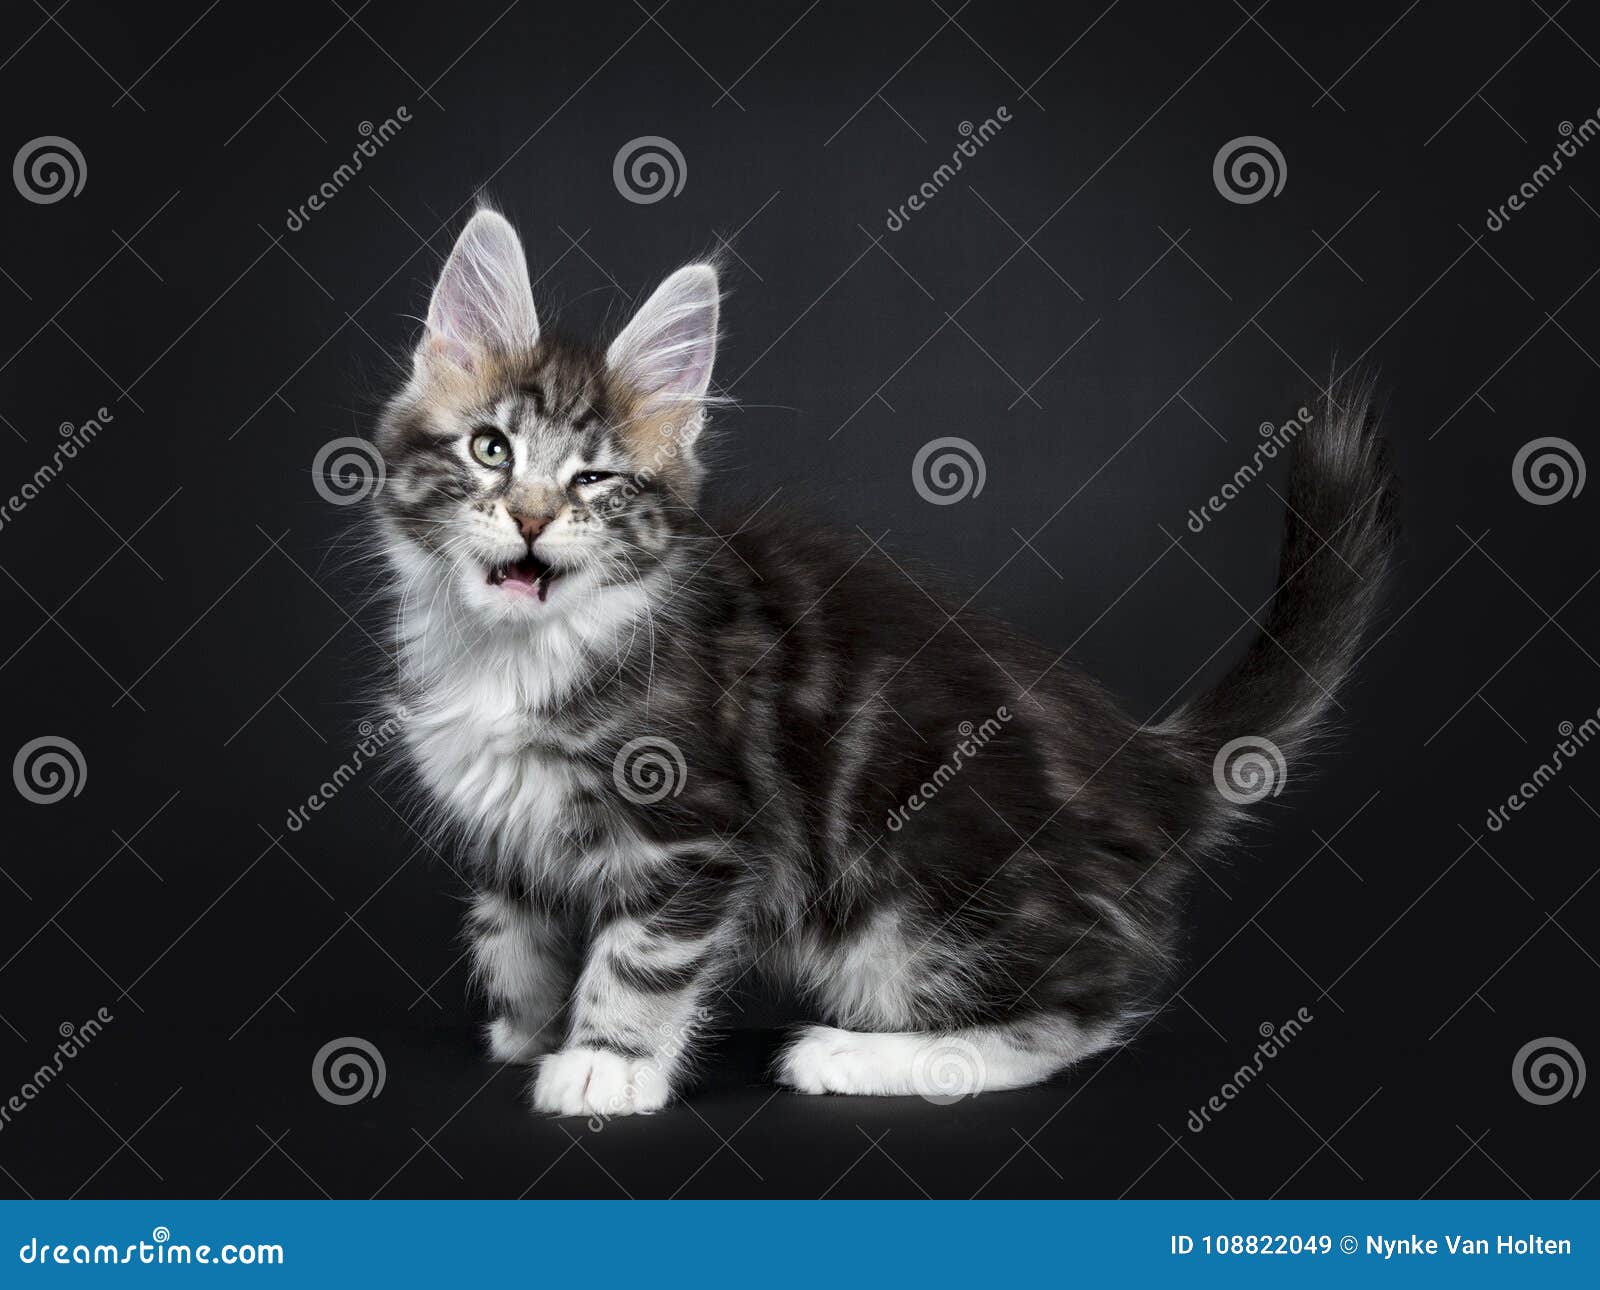 Maine Coon Kitten Standing Side Ways Stock Image Image of catchy, female 108822049